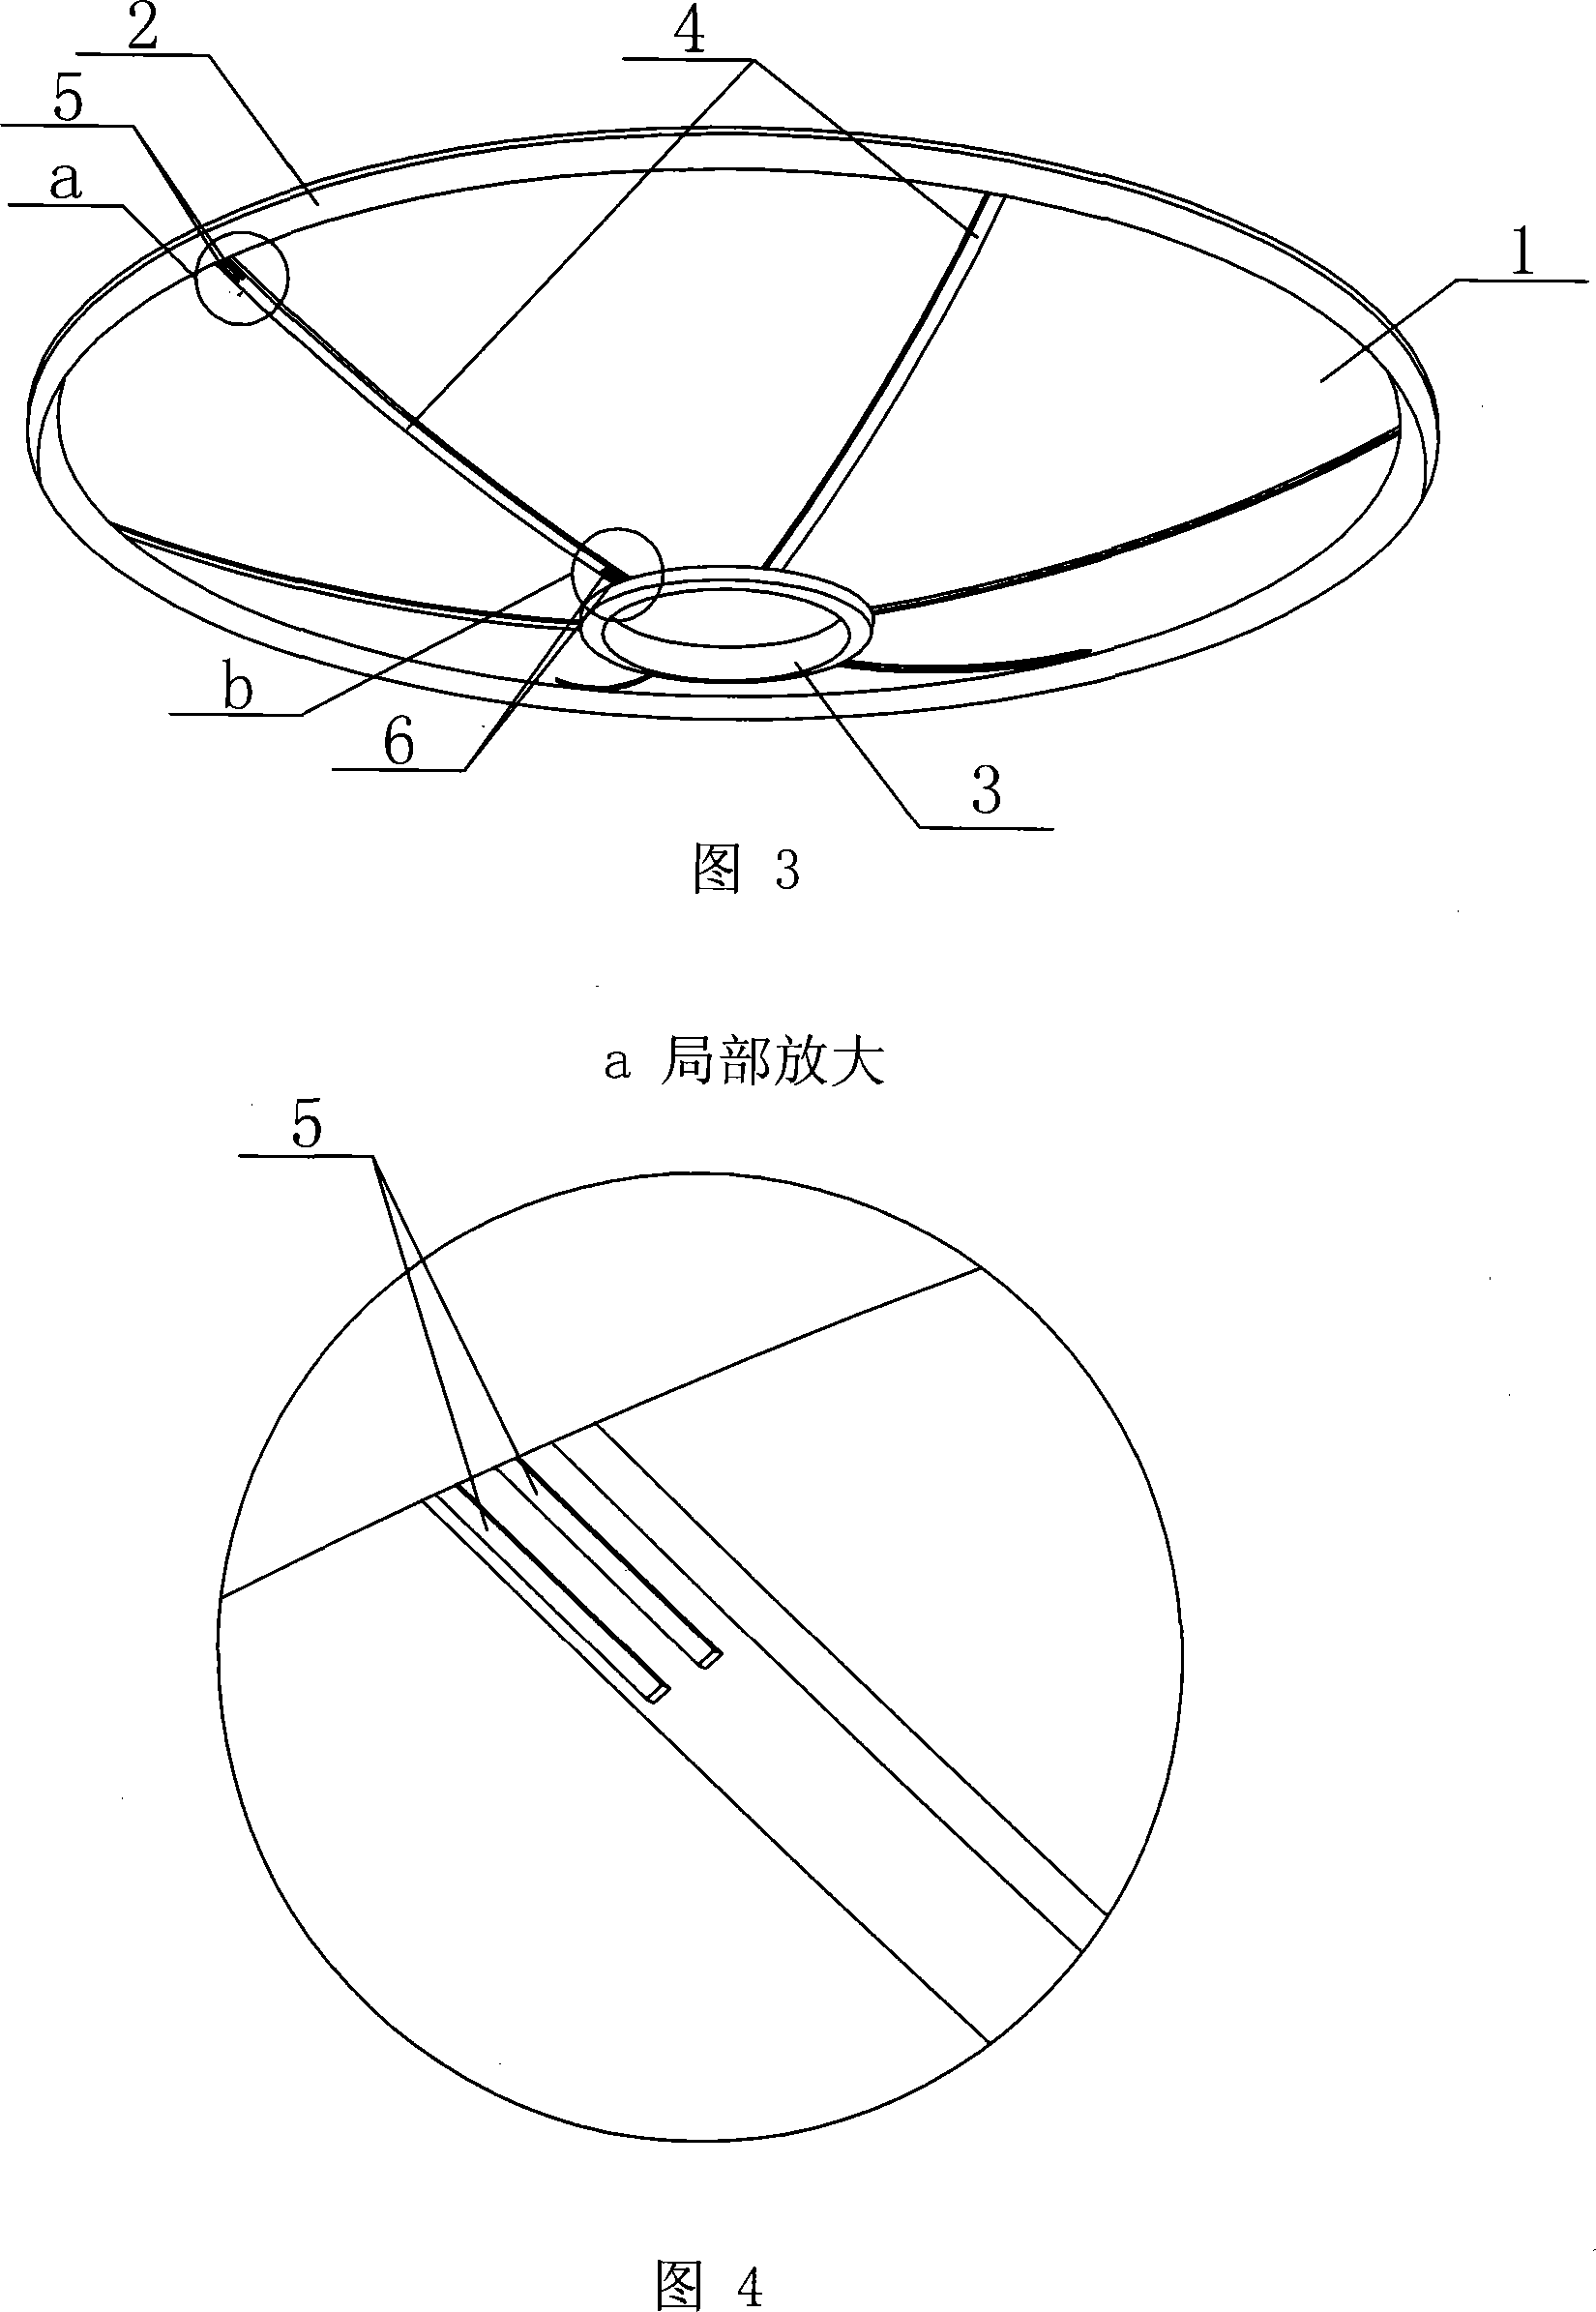 Extensible solid surface antenna reflective face of shape memory material